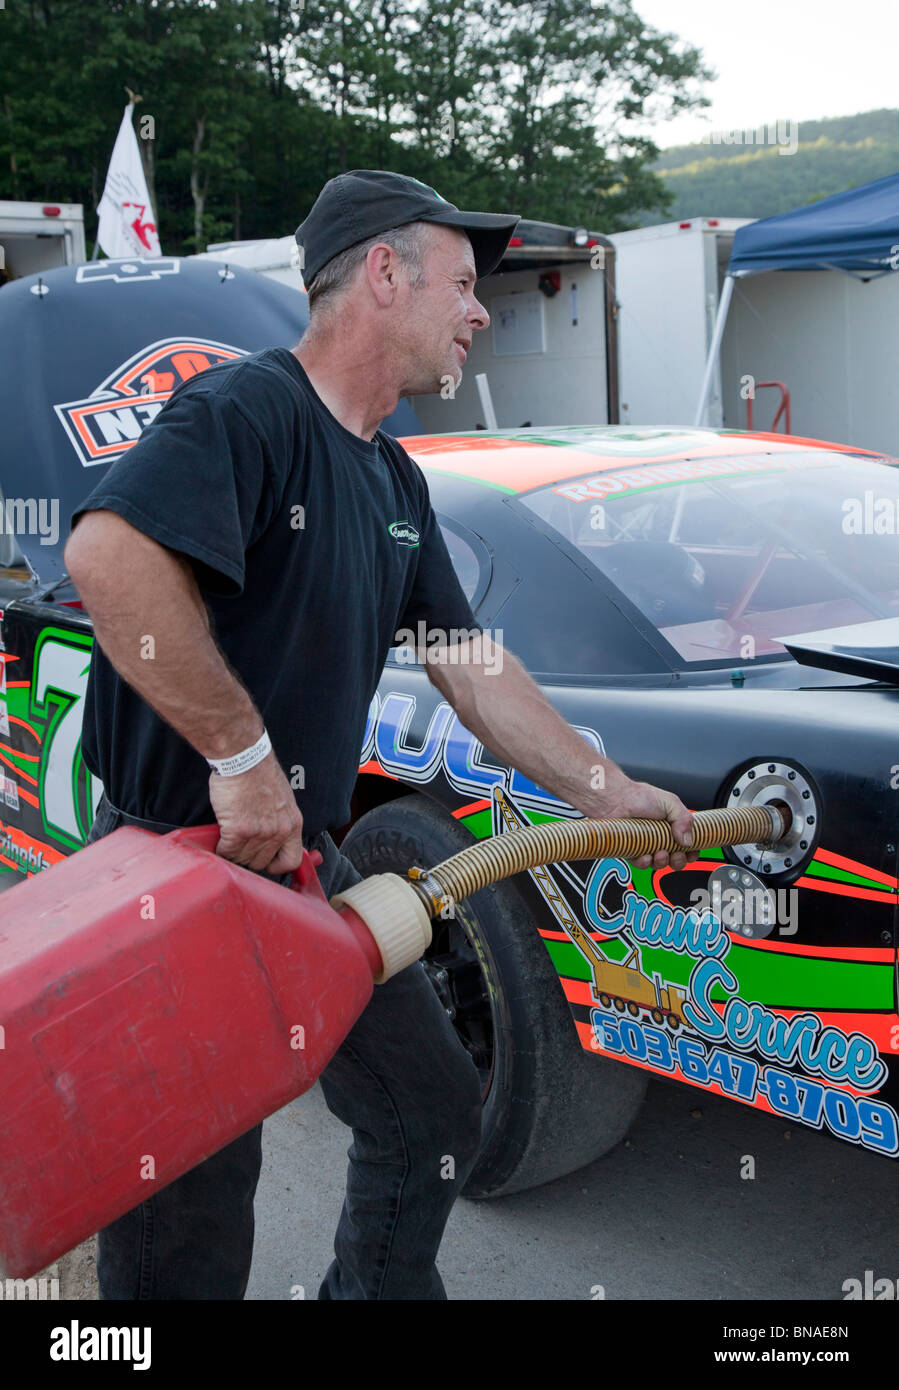 Woodstock, New Hampshire - A mechanic fuels a race car in the pits during stock car racing at White Mountain Motorsports Park. Stock Photo